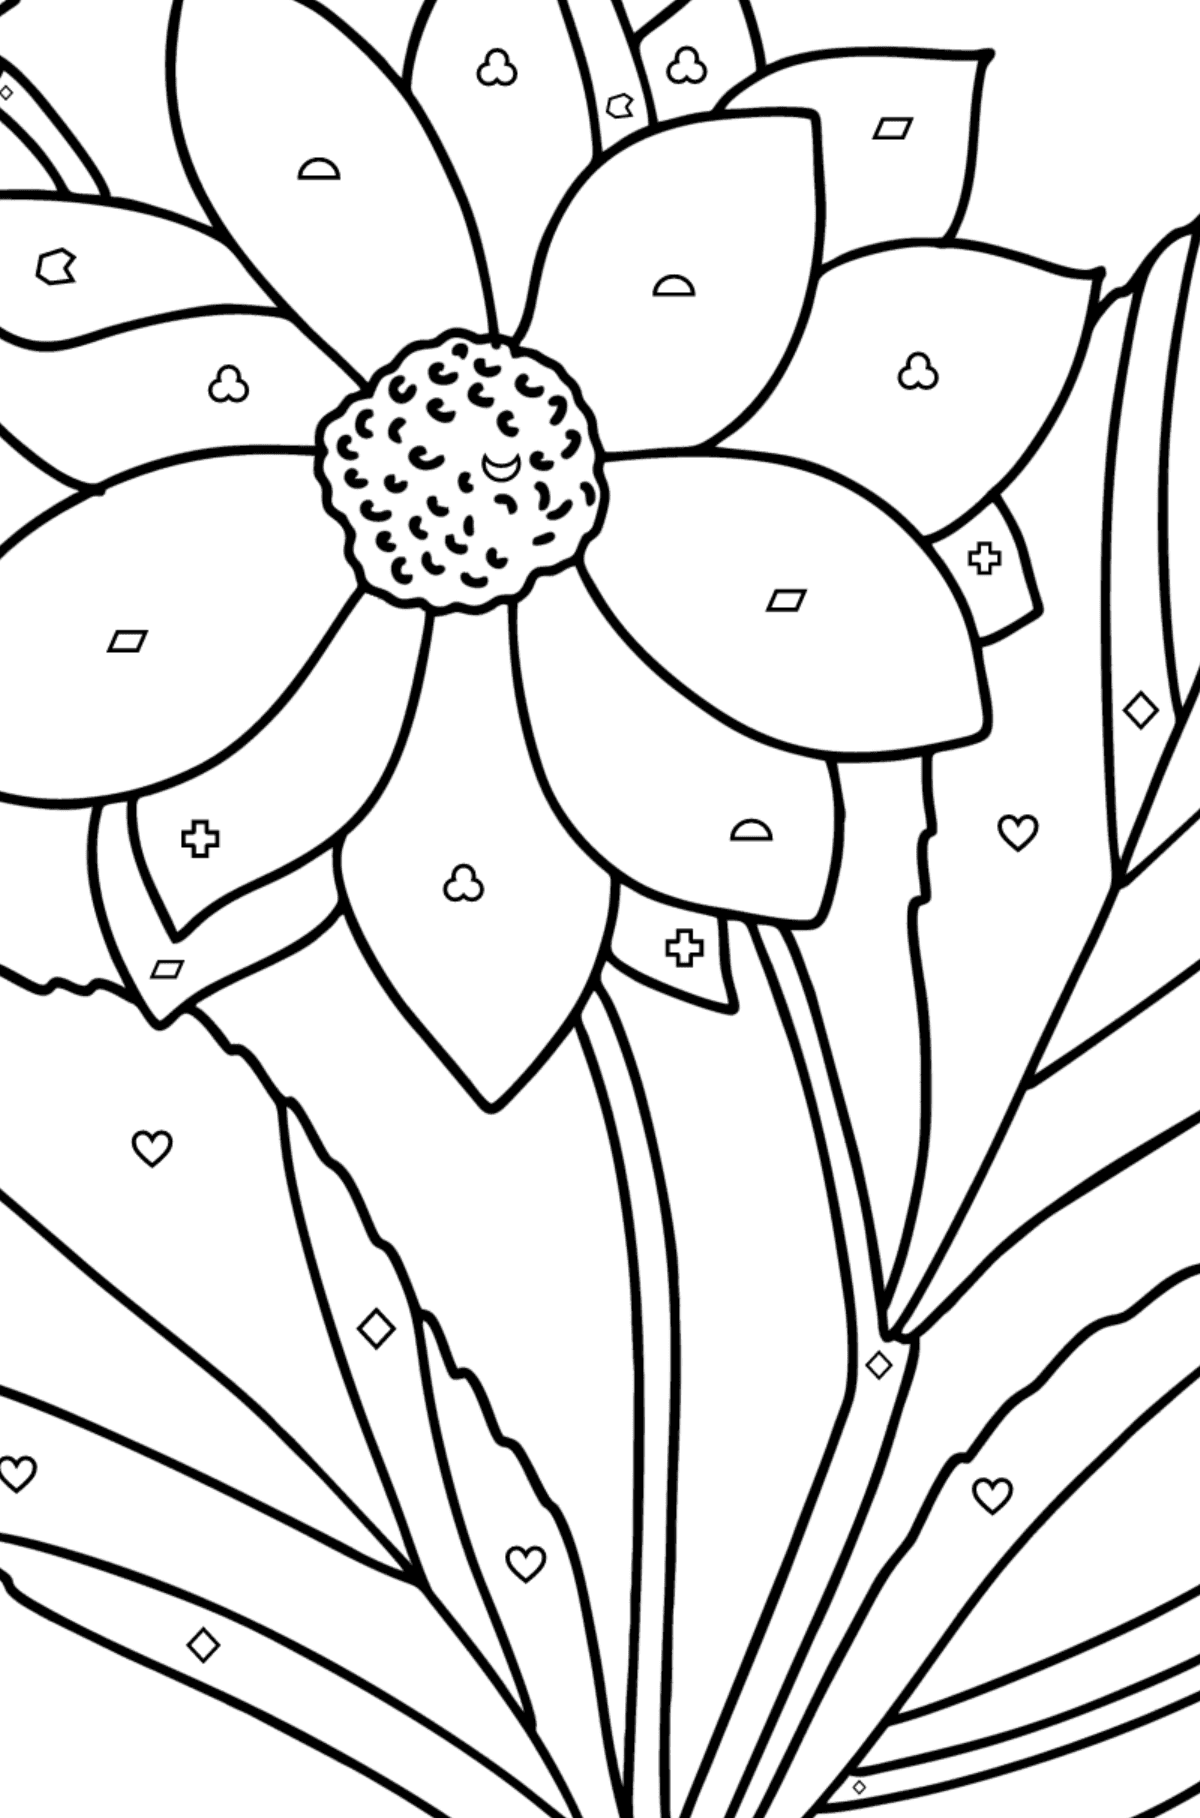 Dahlias coloring page - Coloring by Geometric Shapes for Kids